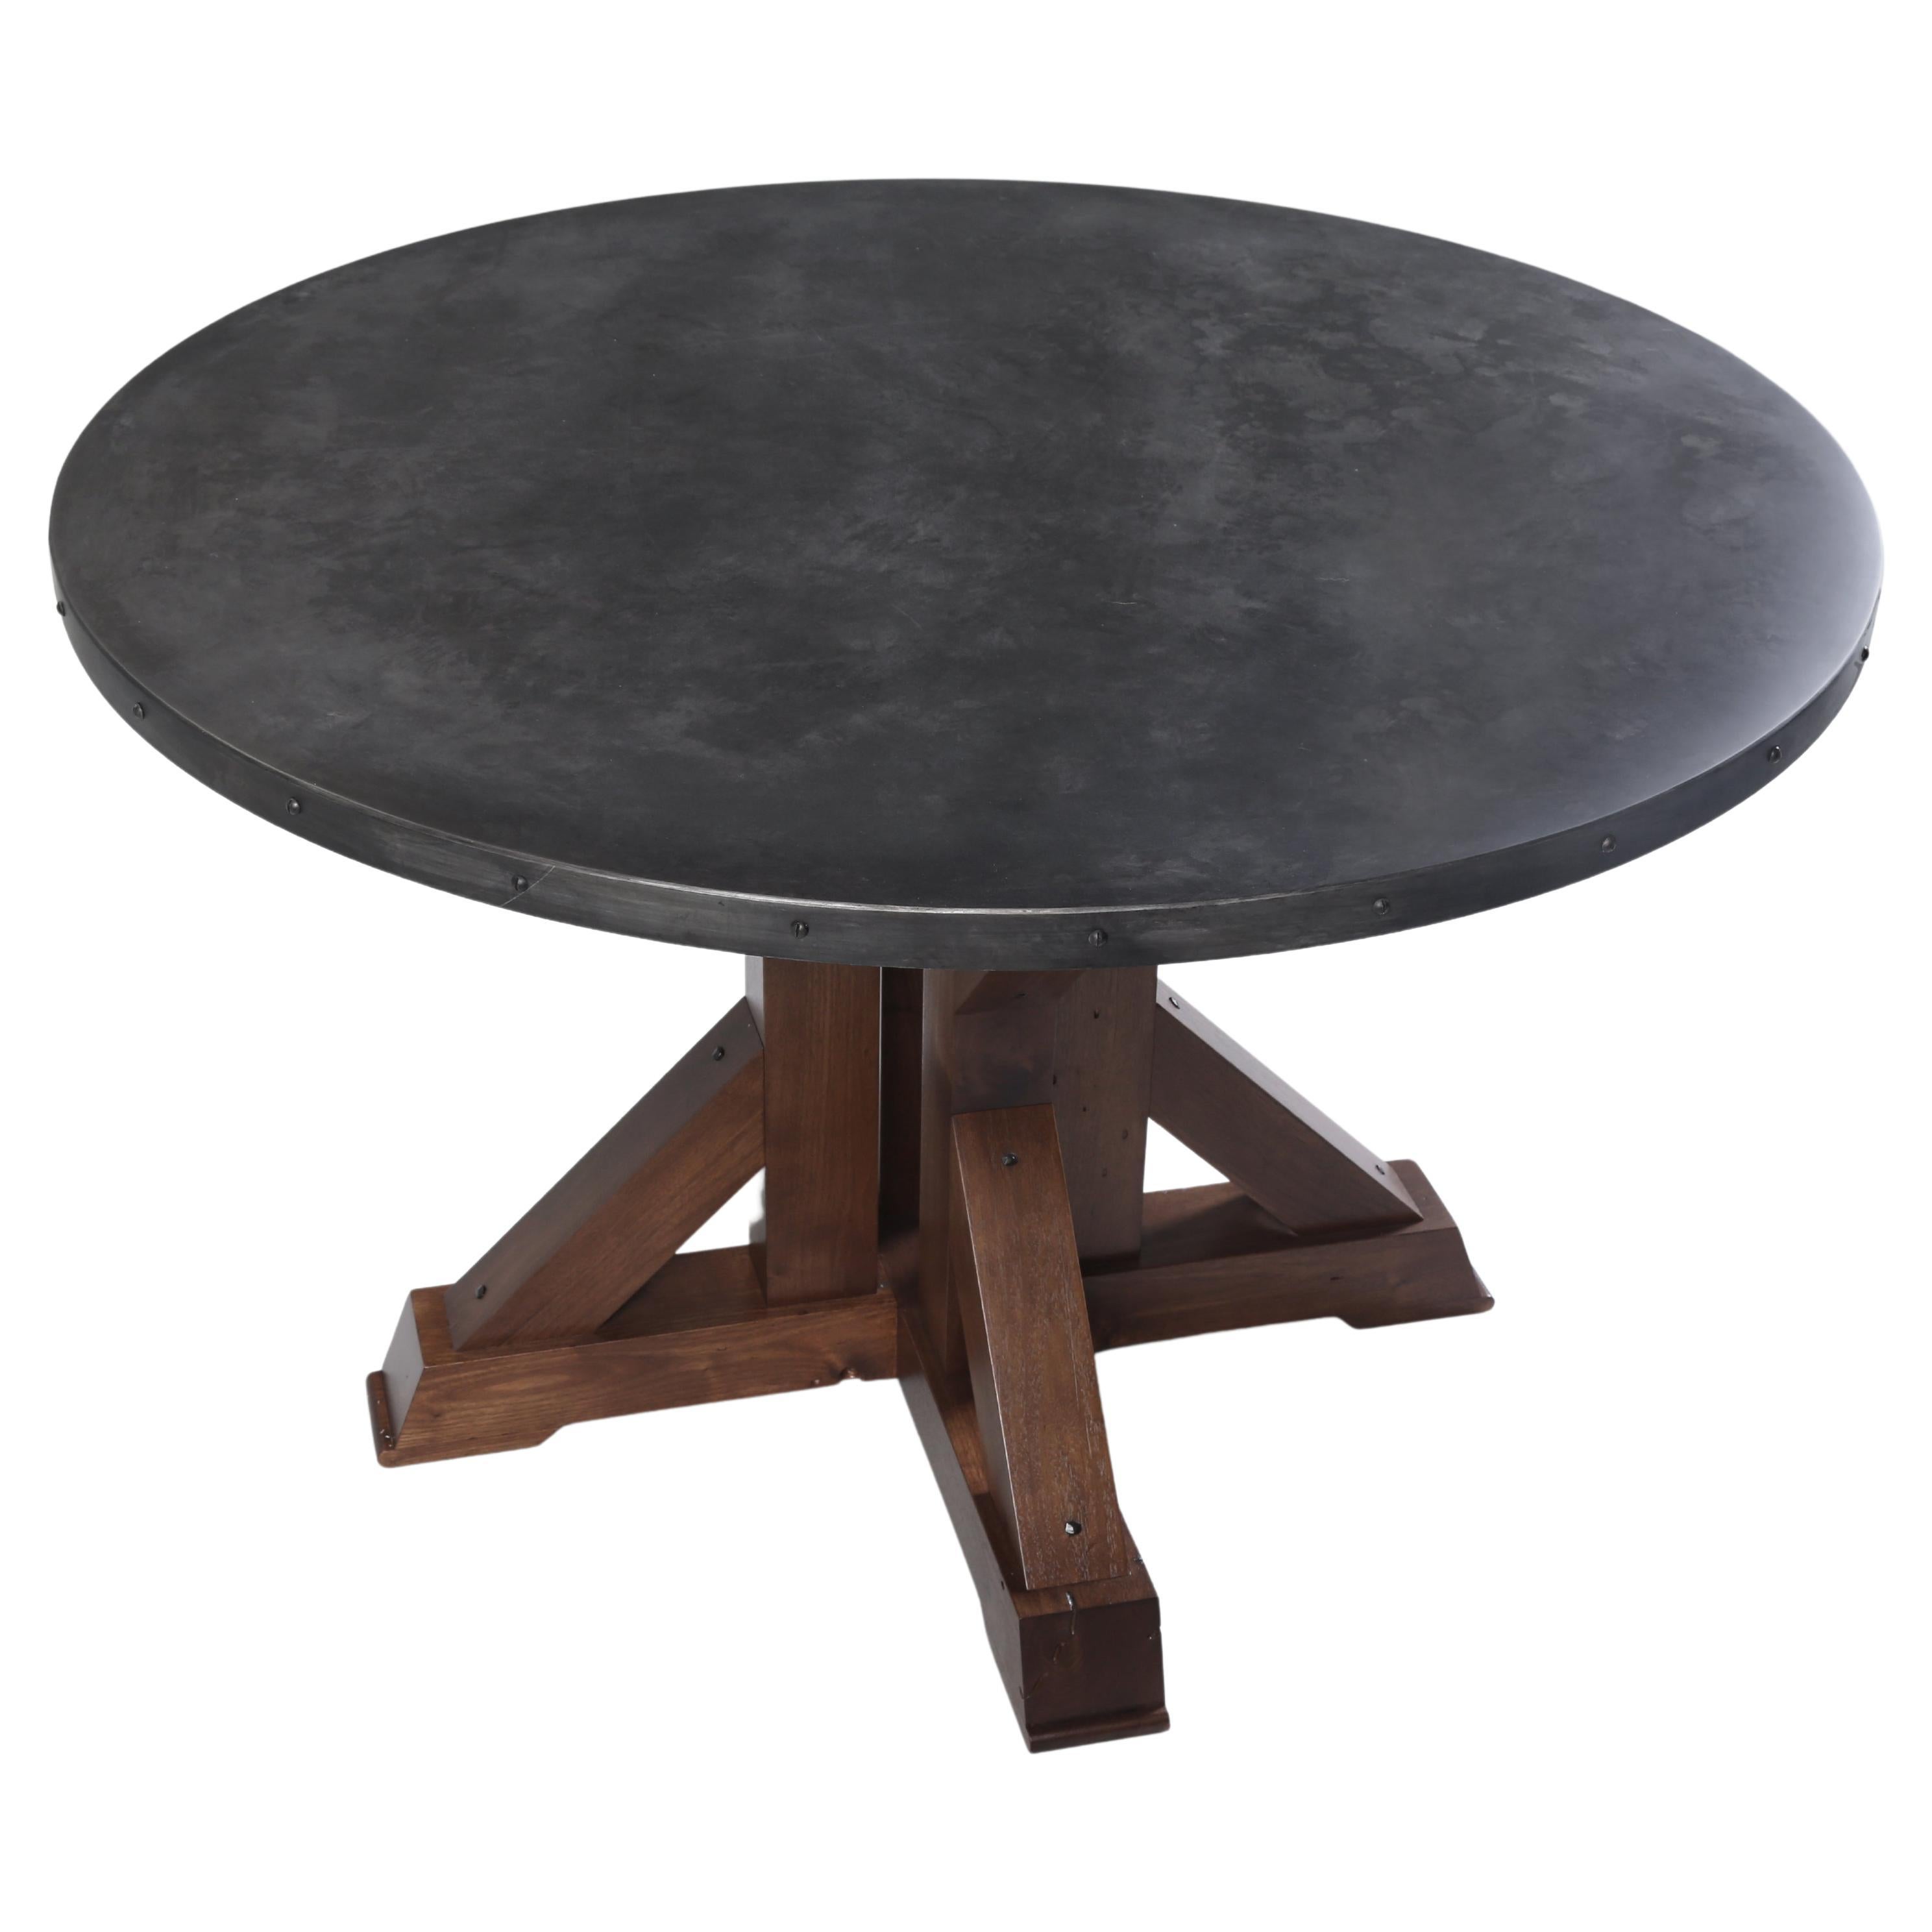 What is a pedestal table?